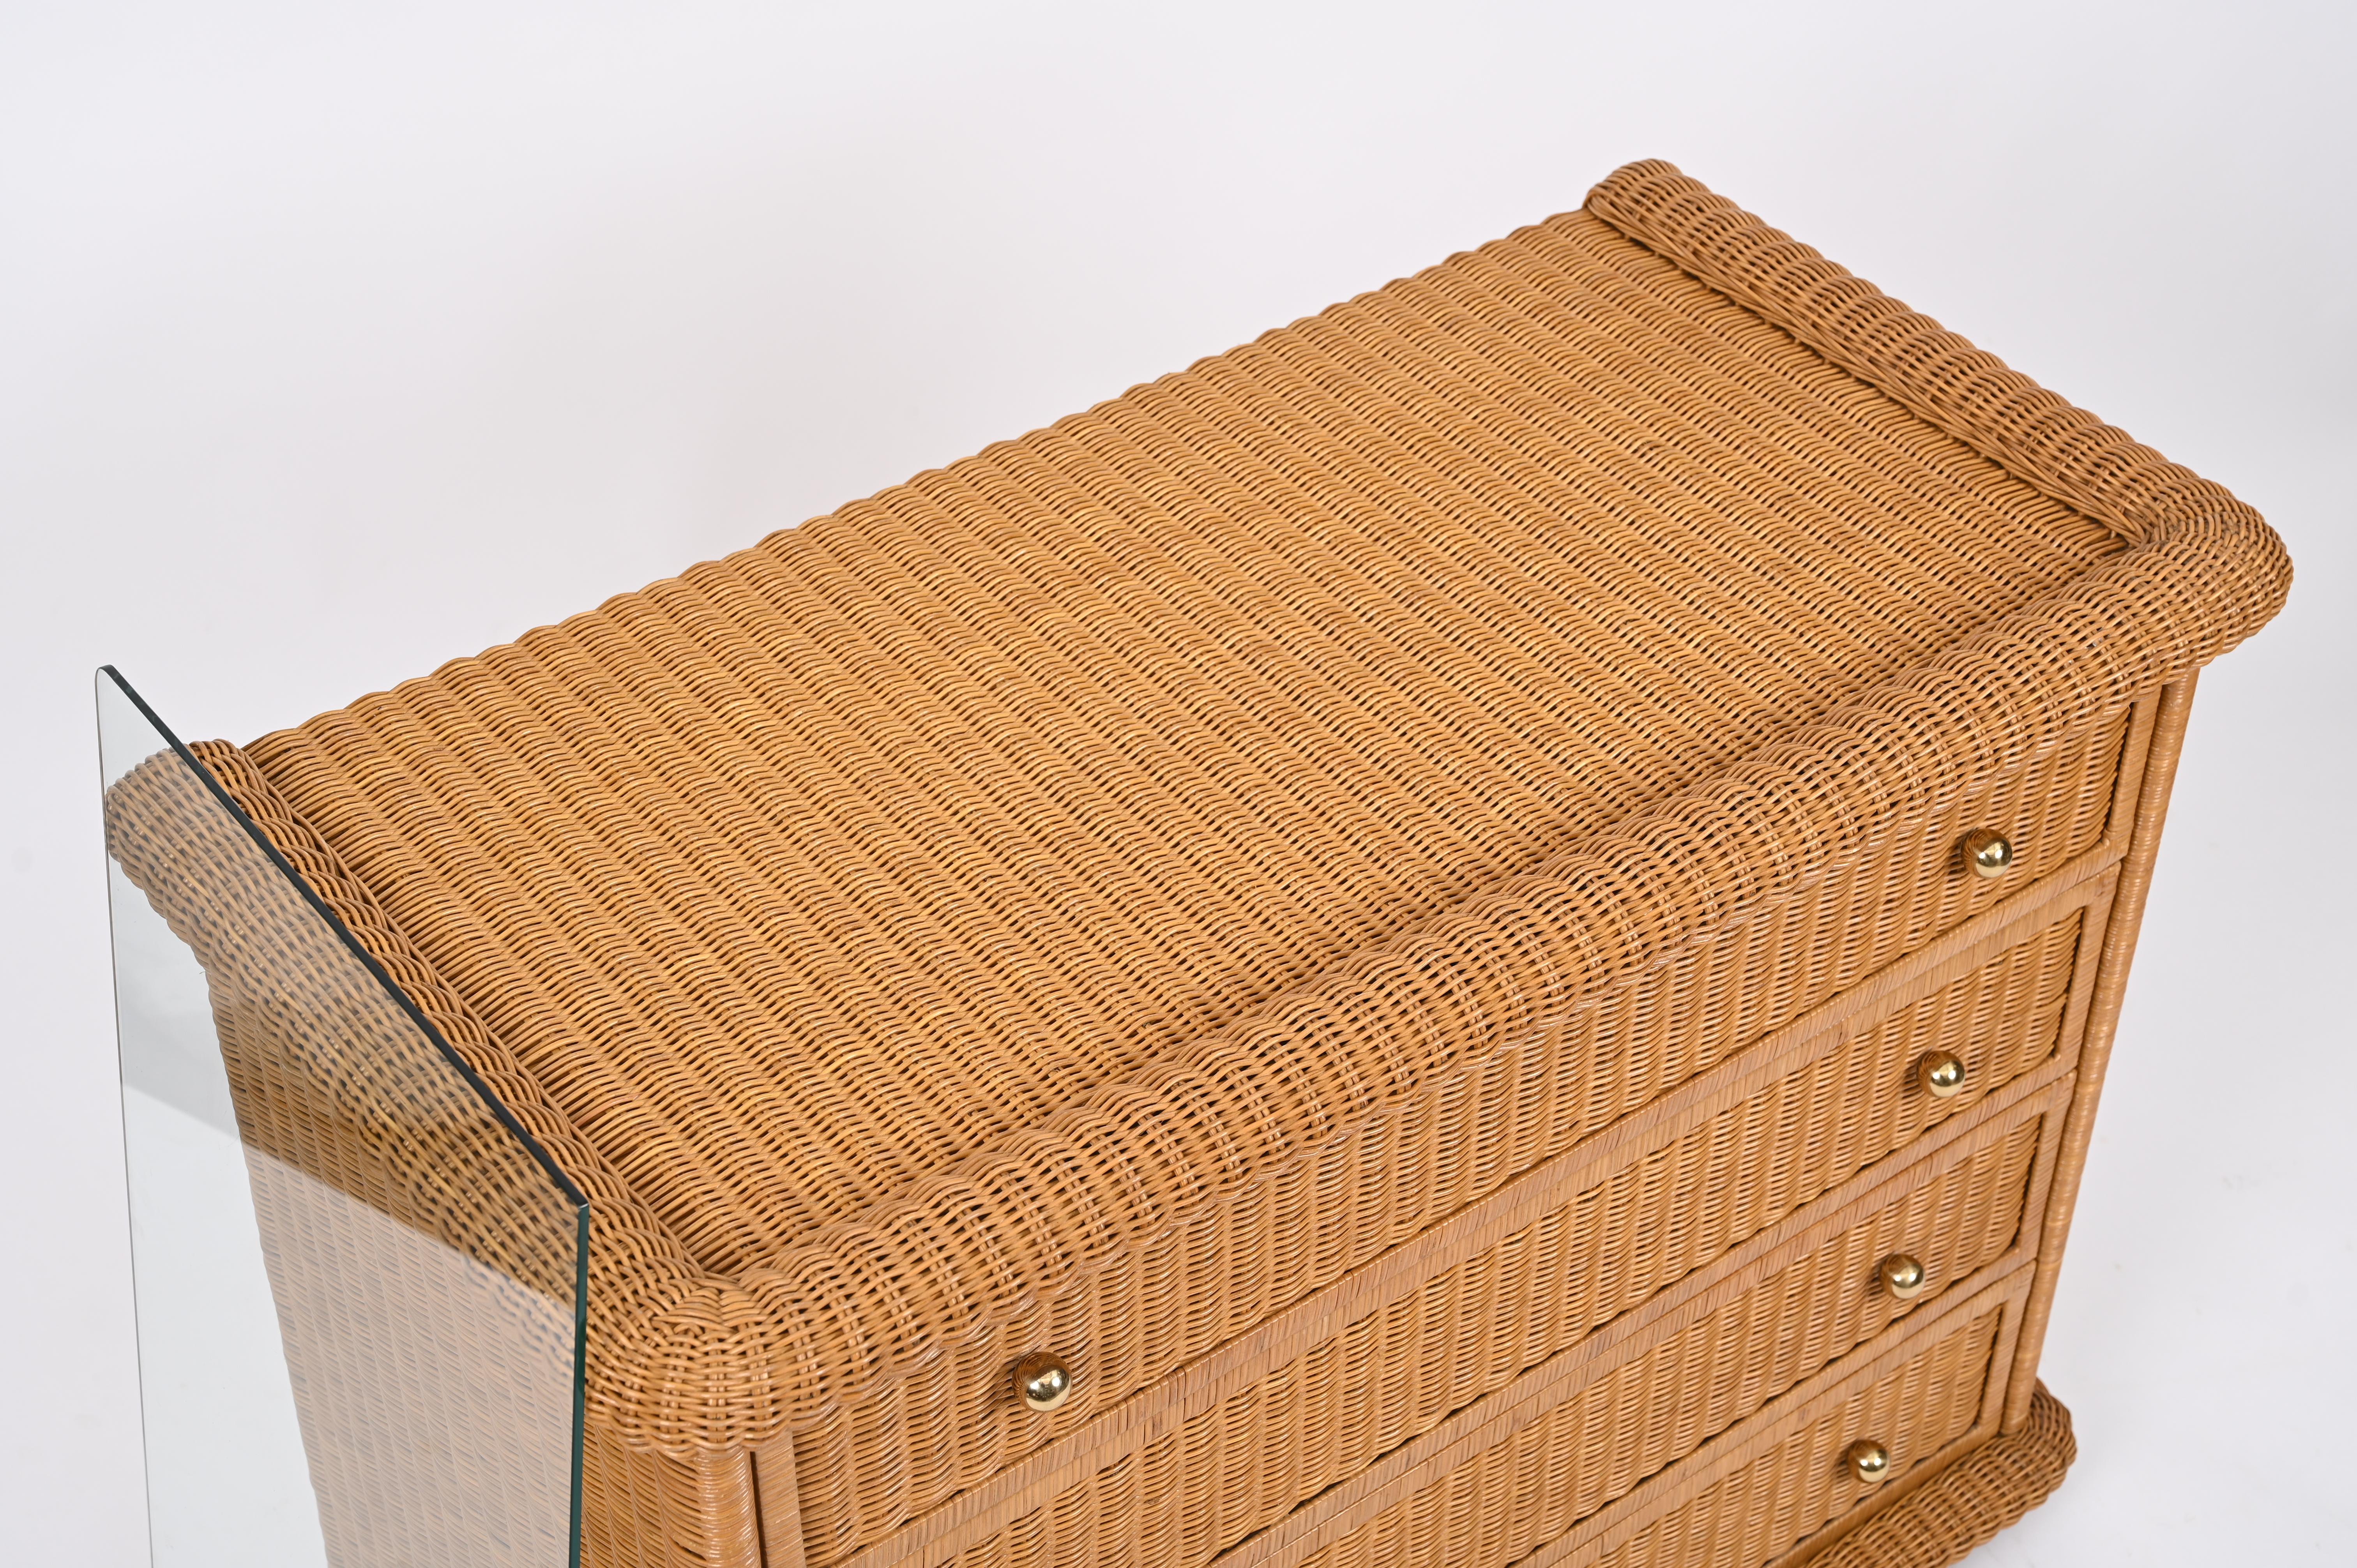 French Riviera Chest of Drawers in Woven Rattan by Vivai del Sud, Italy, 1970s For Sale 1